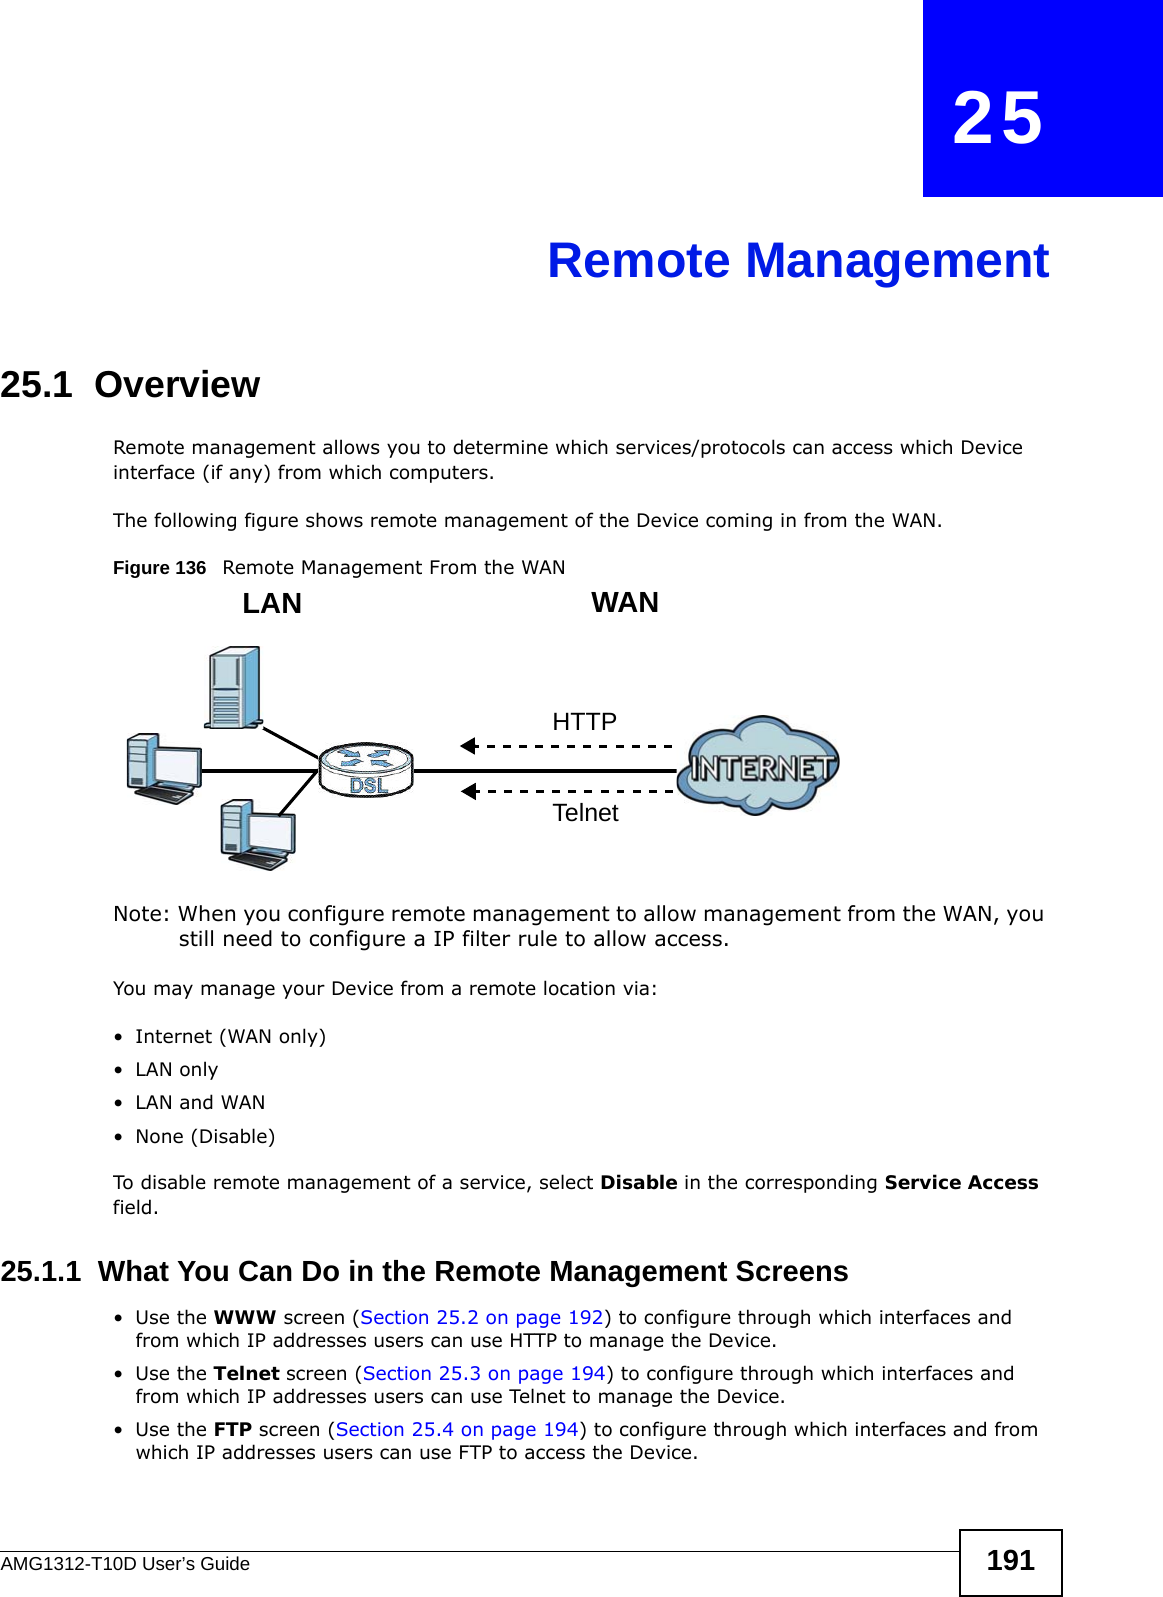 AMG1312-T10D User’s Guide 191CHAPTER   25Remote Management25.1  OverviewRemote management allows you to determine which services/protocols can access which Device interface (if any) from which computers.The following figure shows remote management of the Device coming in from the WAN.Figure 136   Remote Management From the WANNote: When you configure remote management to allow management from the WAN, you still need to configure a IP filter rule to allow access.You may manage your Device from a remote location via:• Internet (WAN only)•LAN only•LAN and WAN• None (Disable)To disable remote management of a service, select Disable in the corresponding Service Access field.25.1.1  What You Can Do in the Remote Management Screens•Use the WWW screen (Section 25.2 on page 192) to configure through which interfaces and from which IP addresses users can use HTTP to manage the Device.•Use the Telnet screen (Section 25.3 on page 194) to configure through which interfaces and from which IP addresses users can use Telnet to manage the Device.•Use the FTP screen (Section 25.4 on page 194) to configure through which interfaces and from which IP addresses users can use FTP to access the Device.LAN WANHTTPTelnet